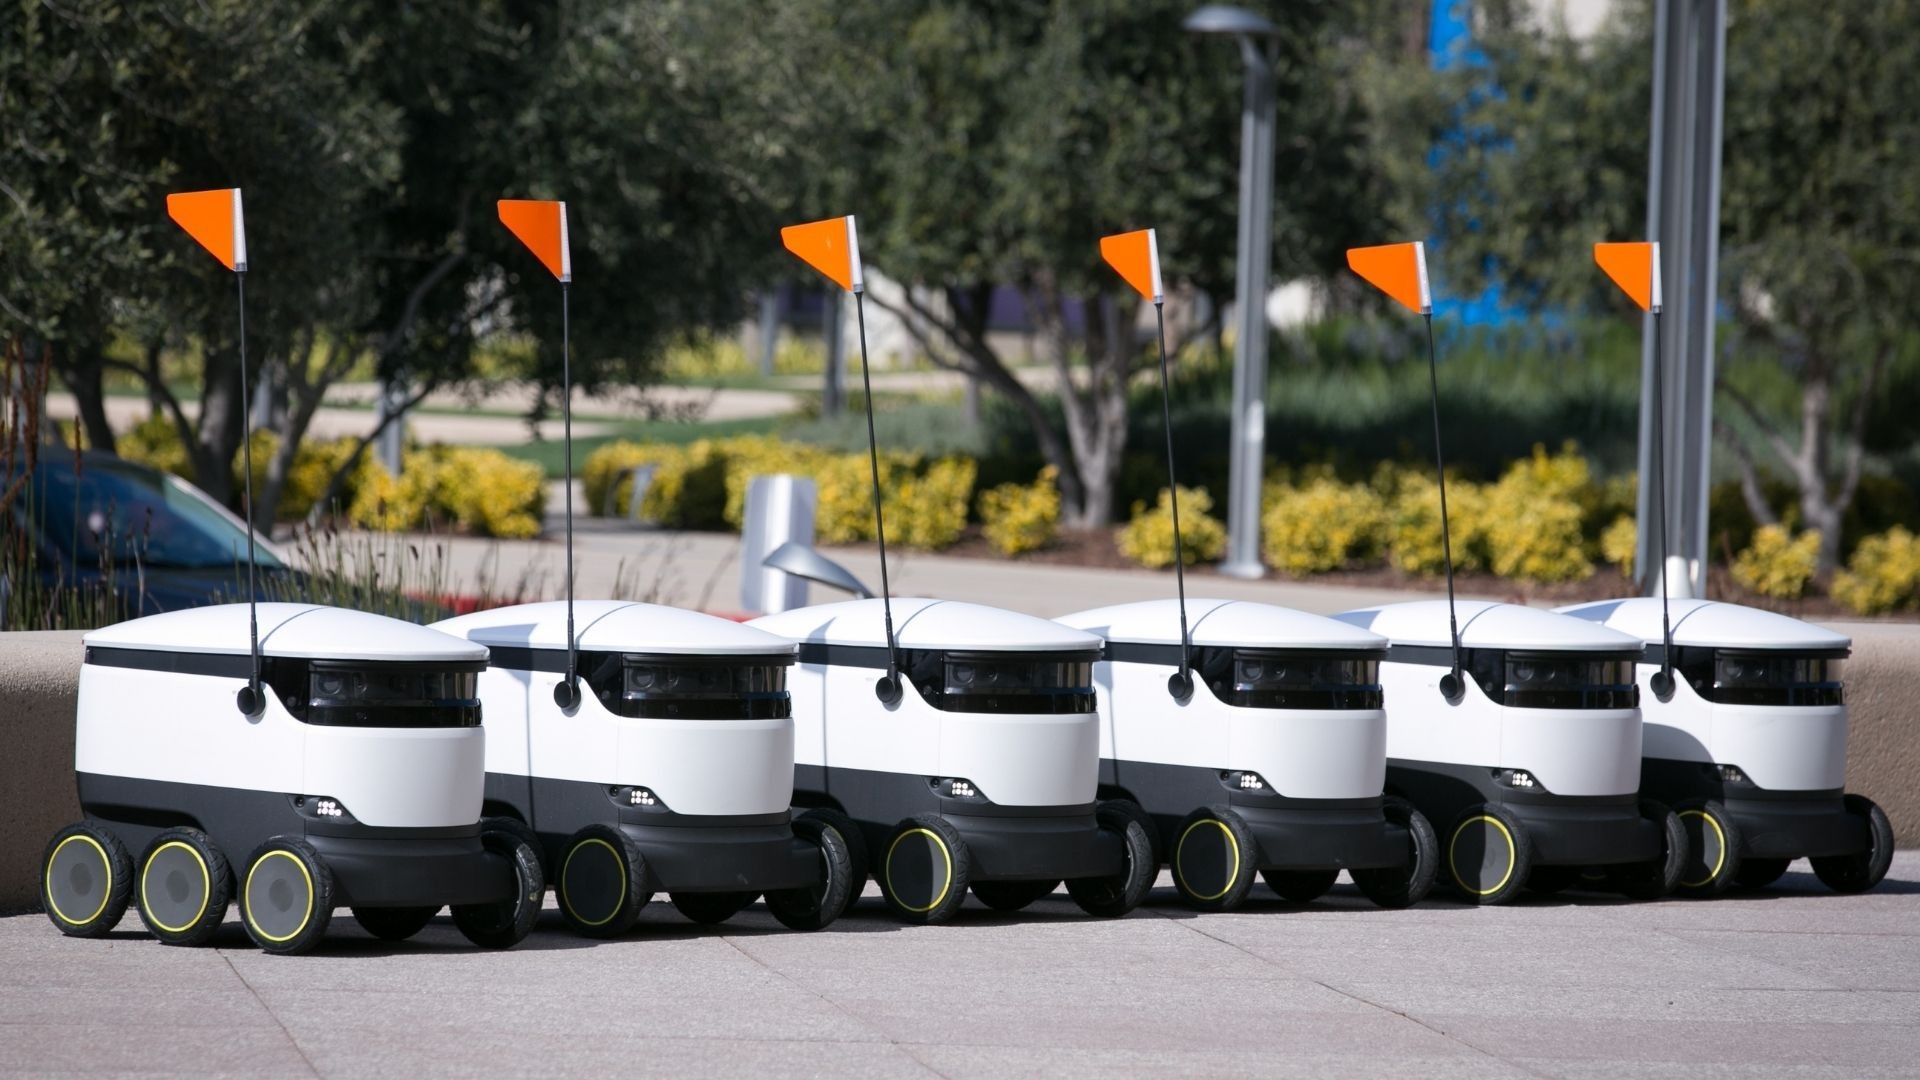 Starship robots lined up outside, waiting for orders to come in